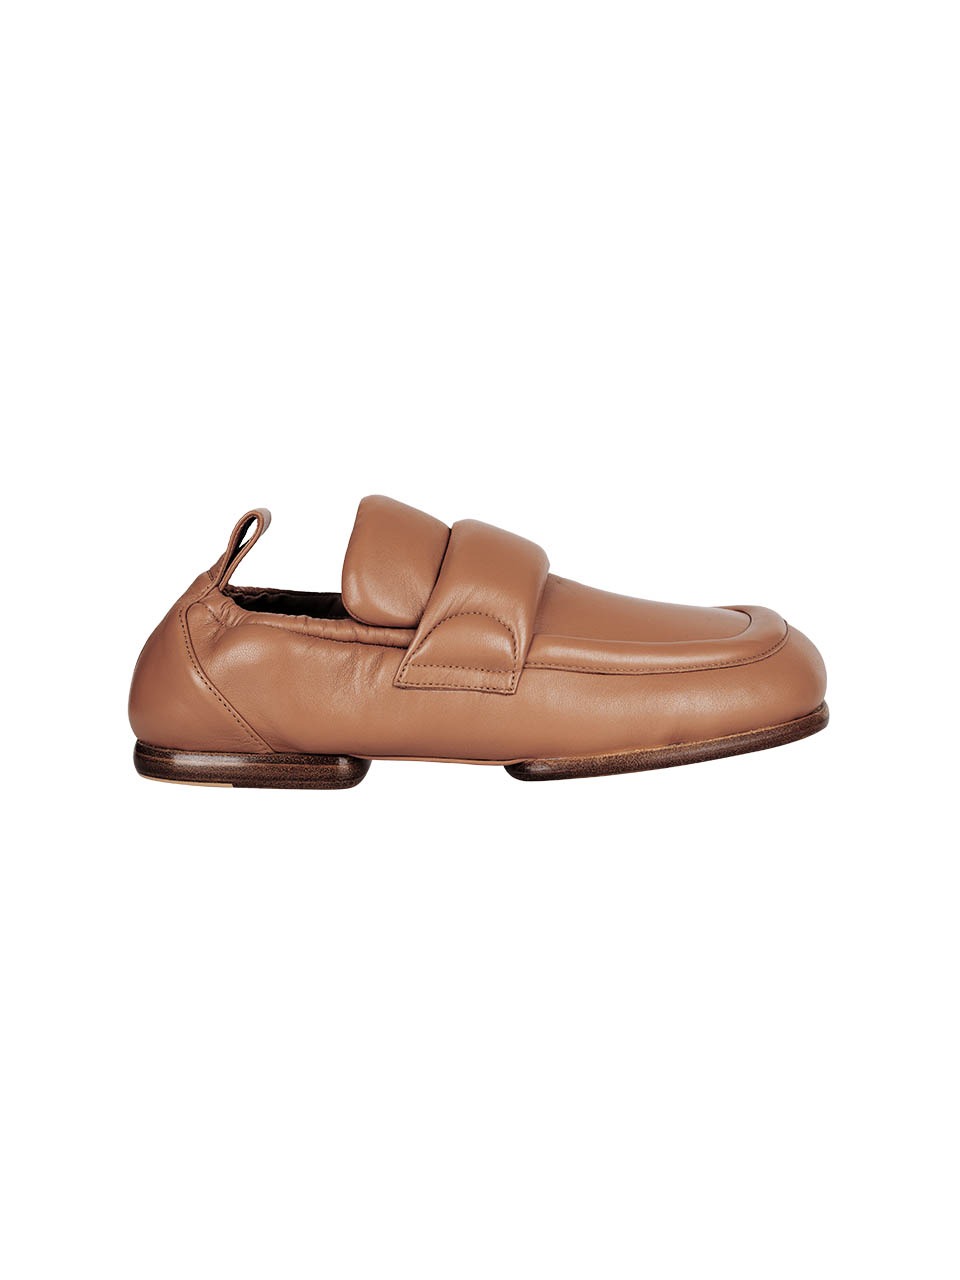 DRIES VAN NOTEN - PADDED LEATHER LOAFER (TAN)